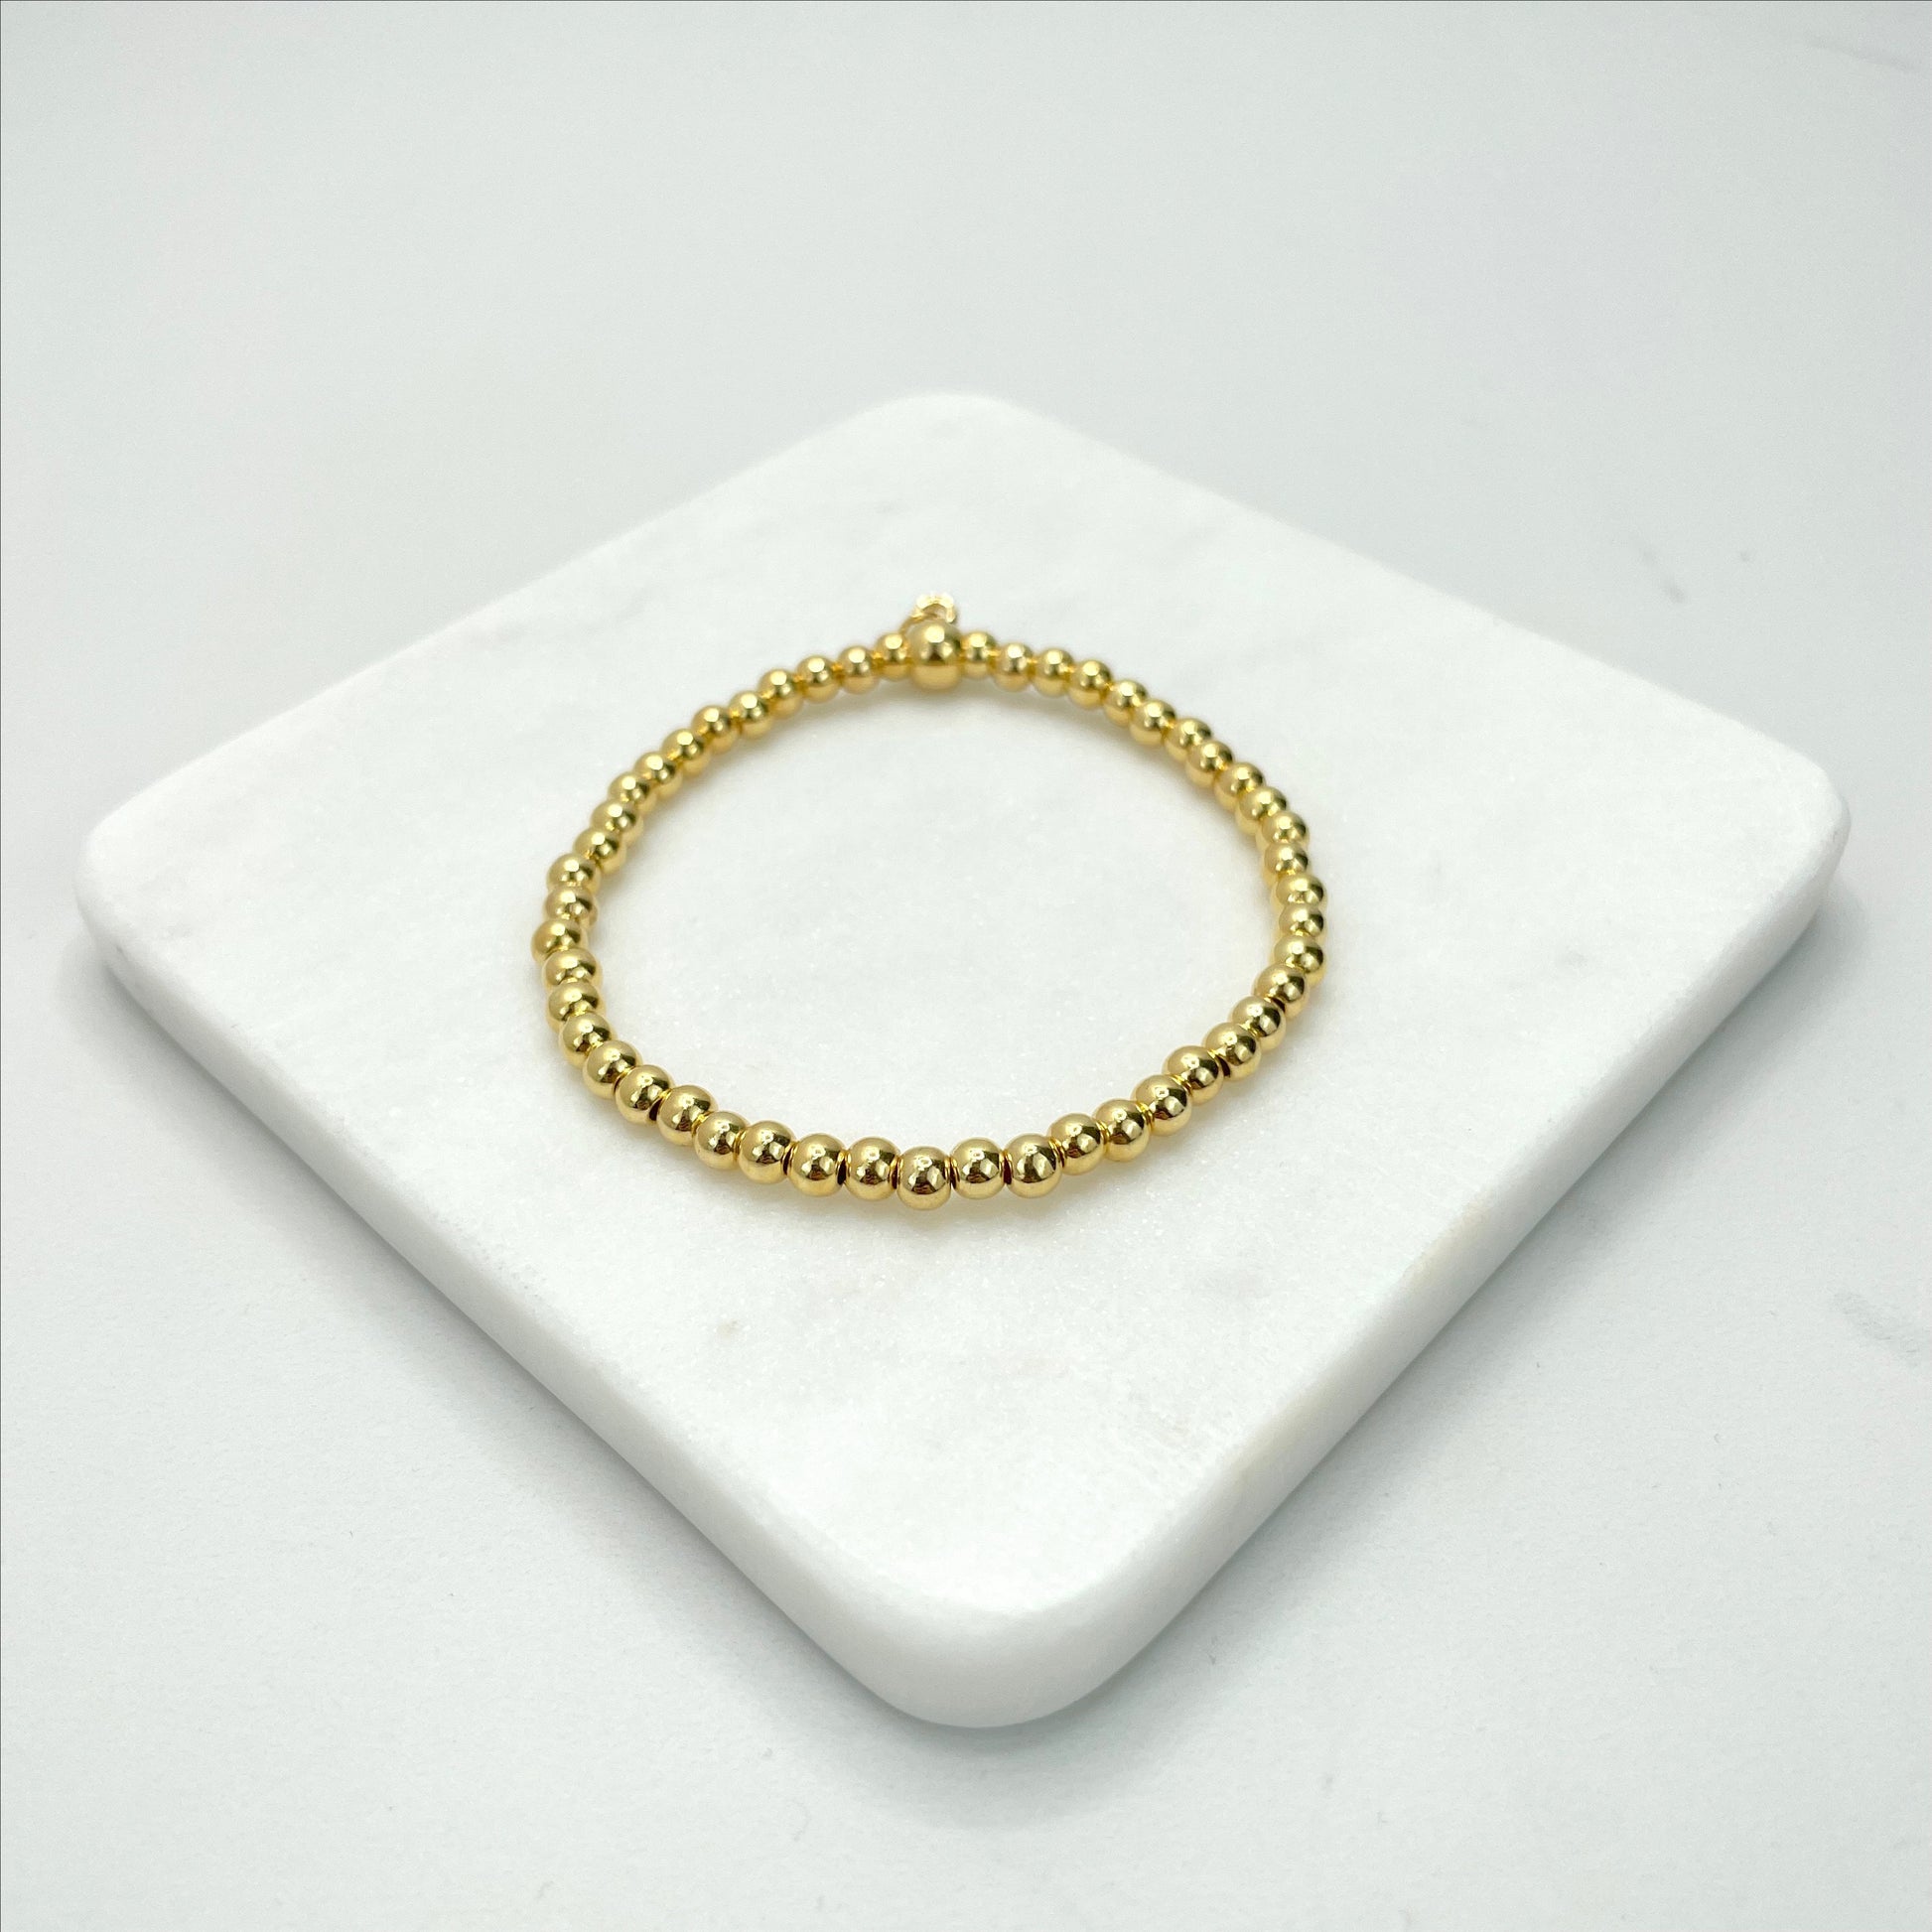 18k Gold Filled Stretch Beads Bracelet Available in 4 sizes For Wholesale and Jewelry Supplies